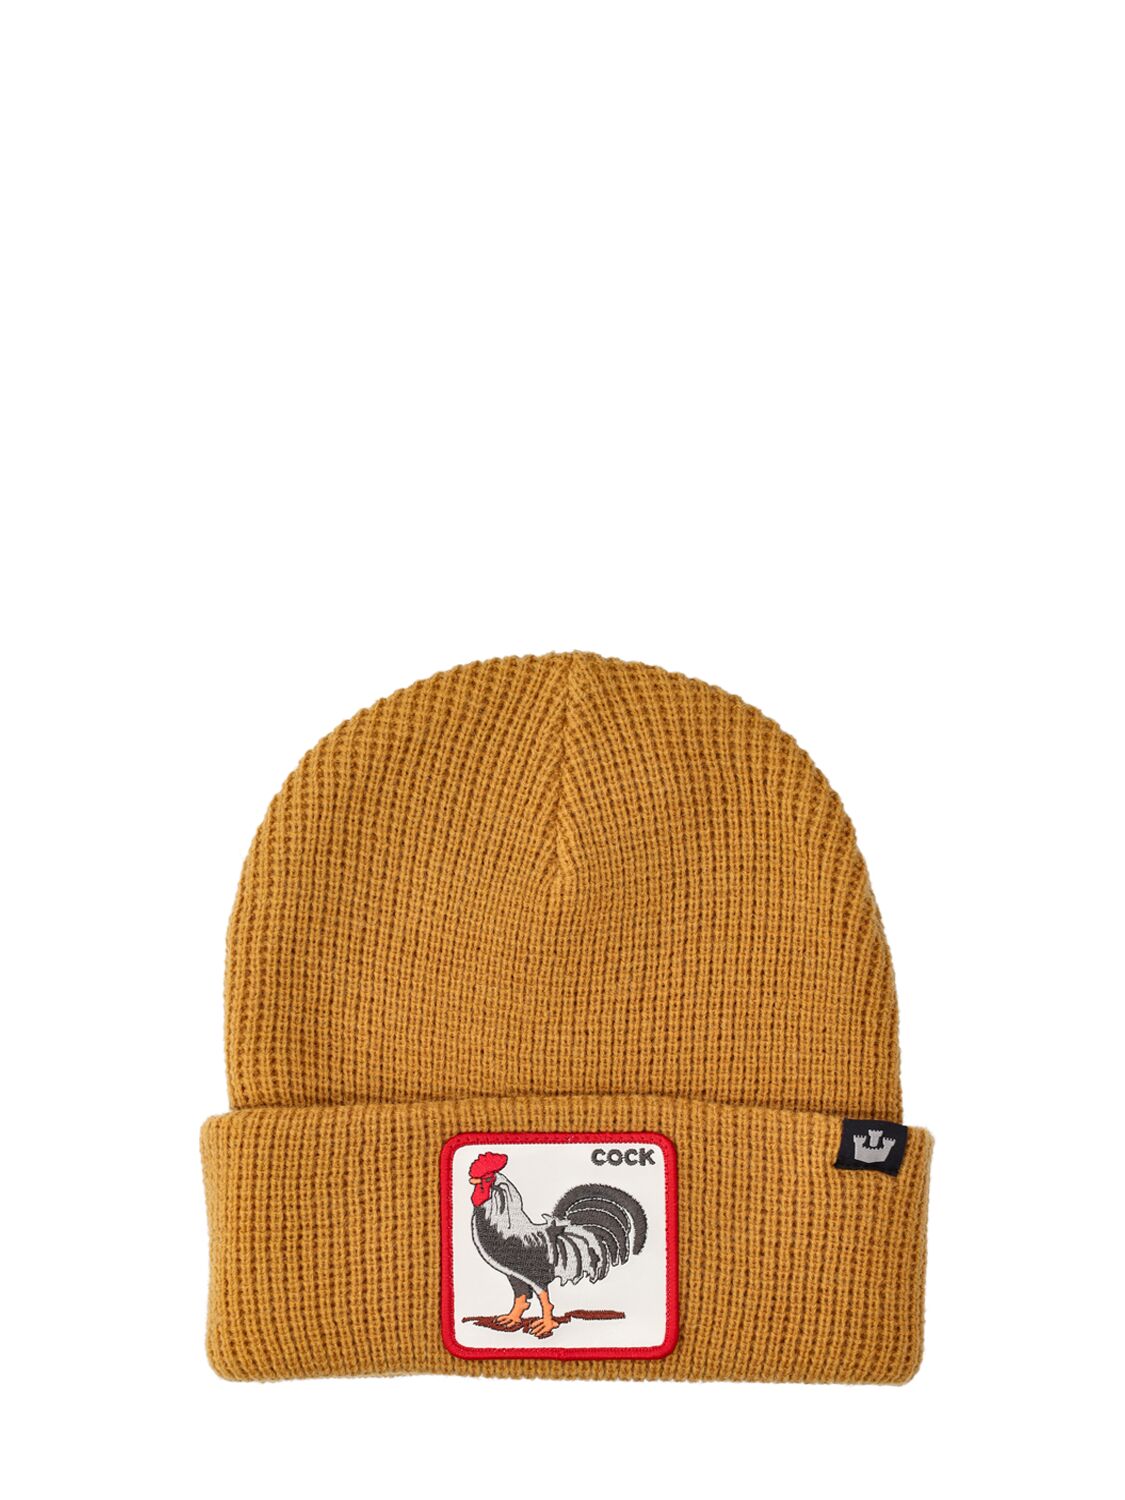 Image of Morning Call Knit Beanie